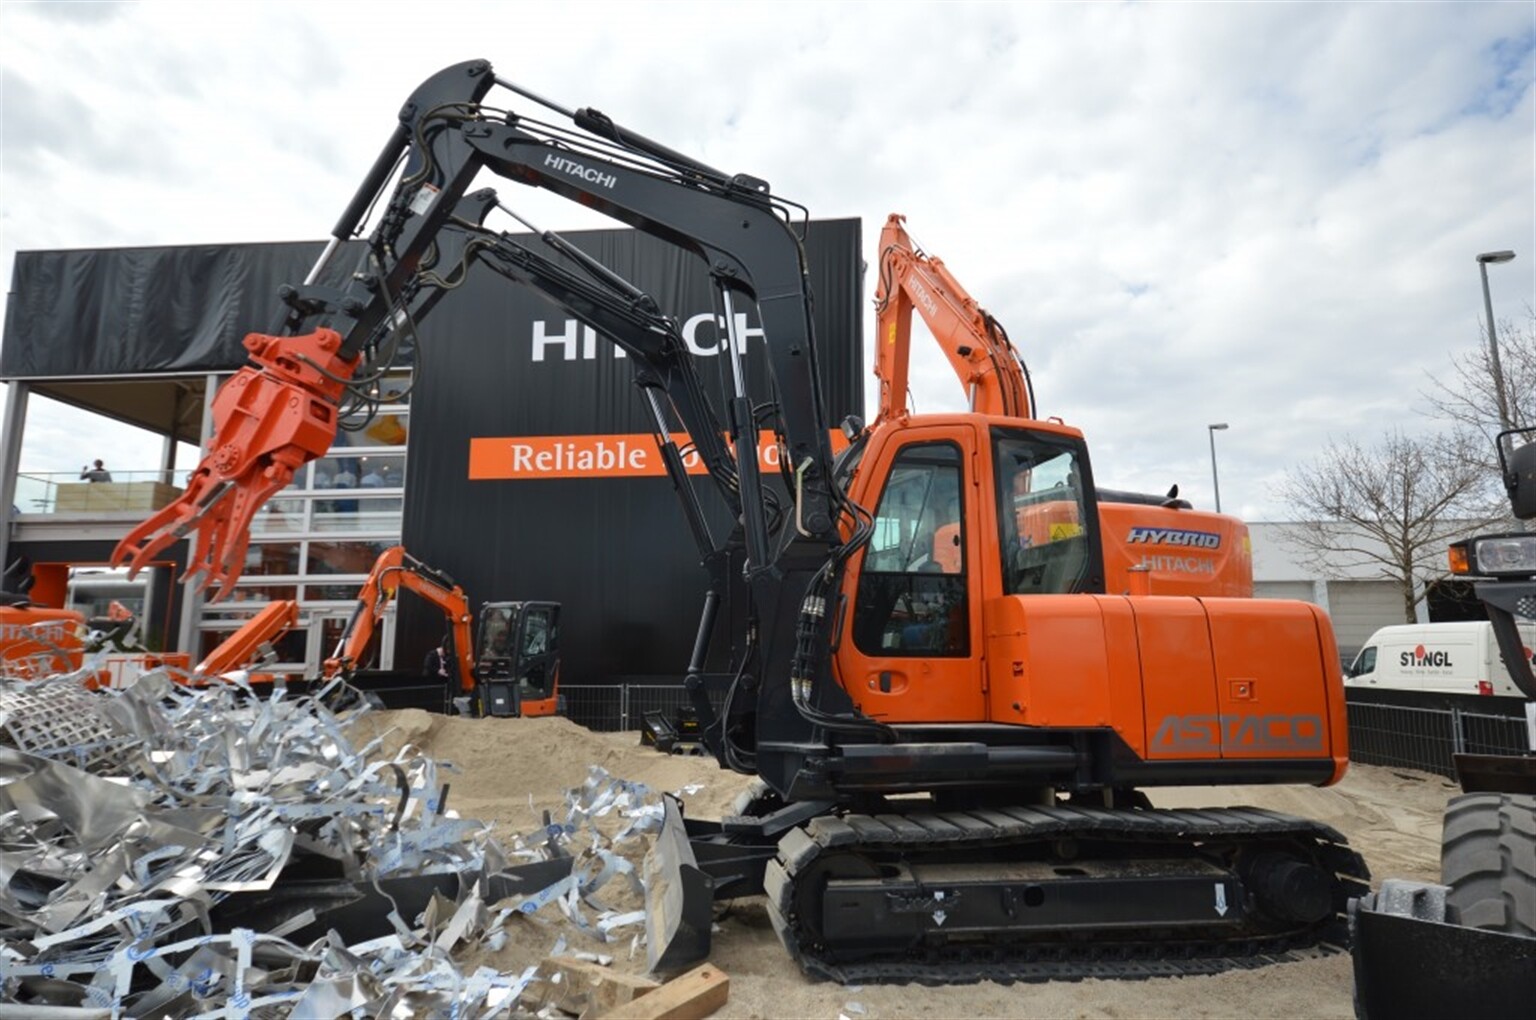 Twin arm Hitachi rescue machine like a modern day Transformer (Blog Post Re-Visited)